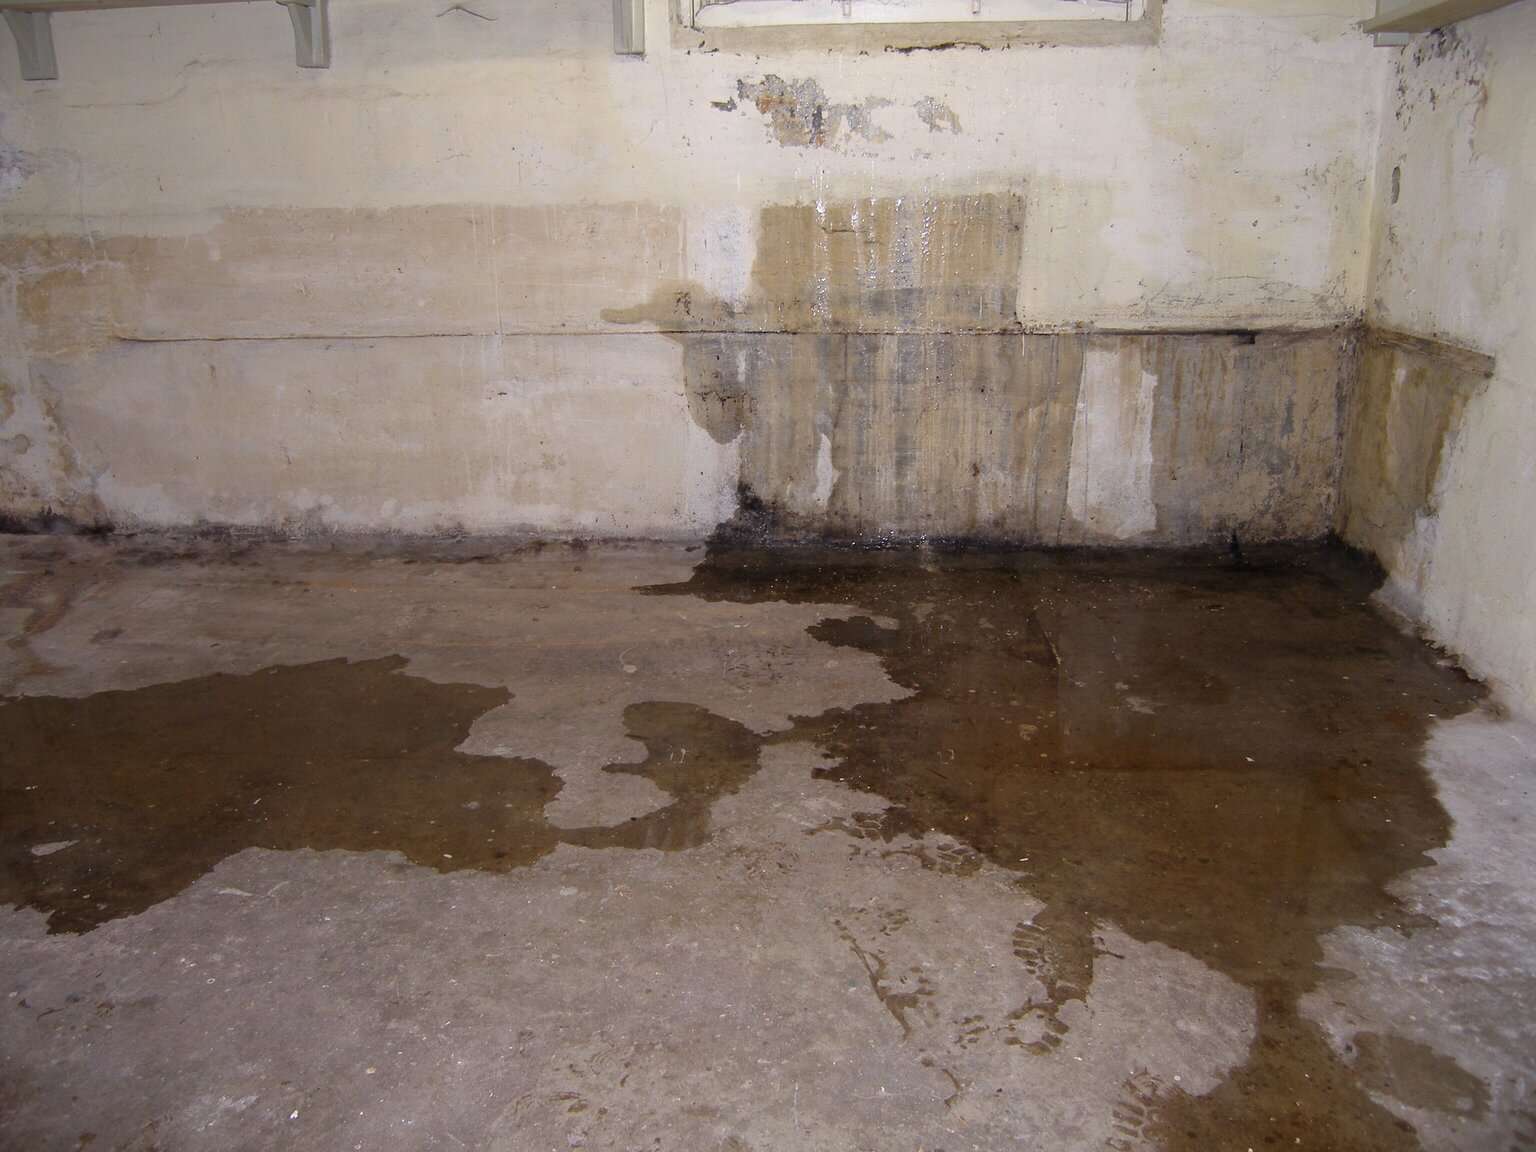 How to Find Out Why My Home Plumbing Is Leaking